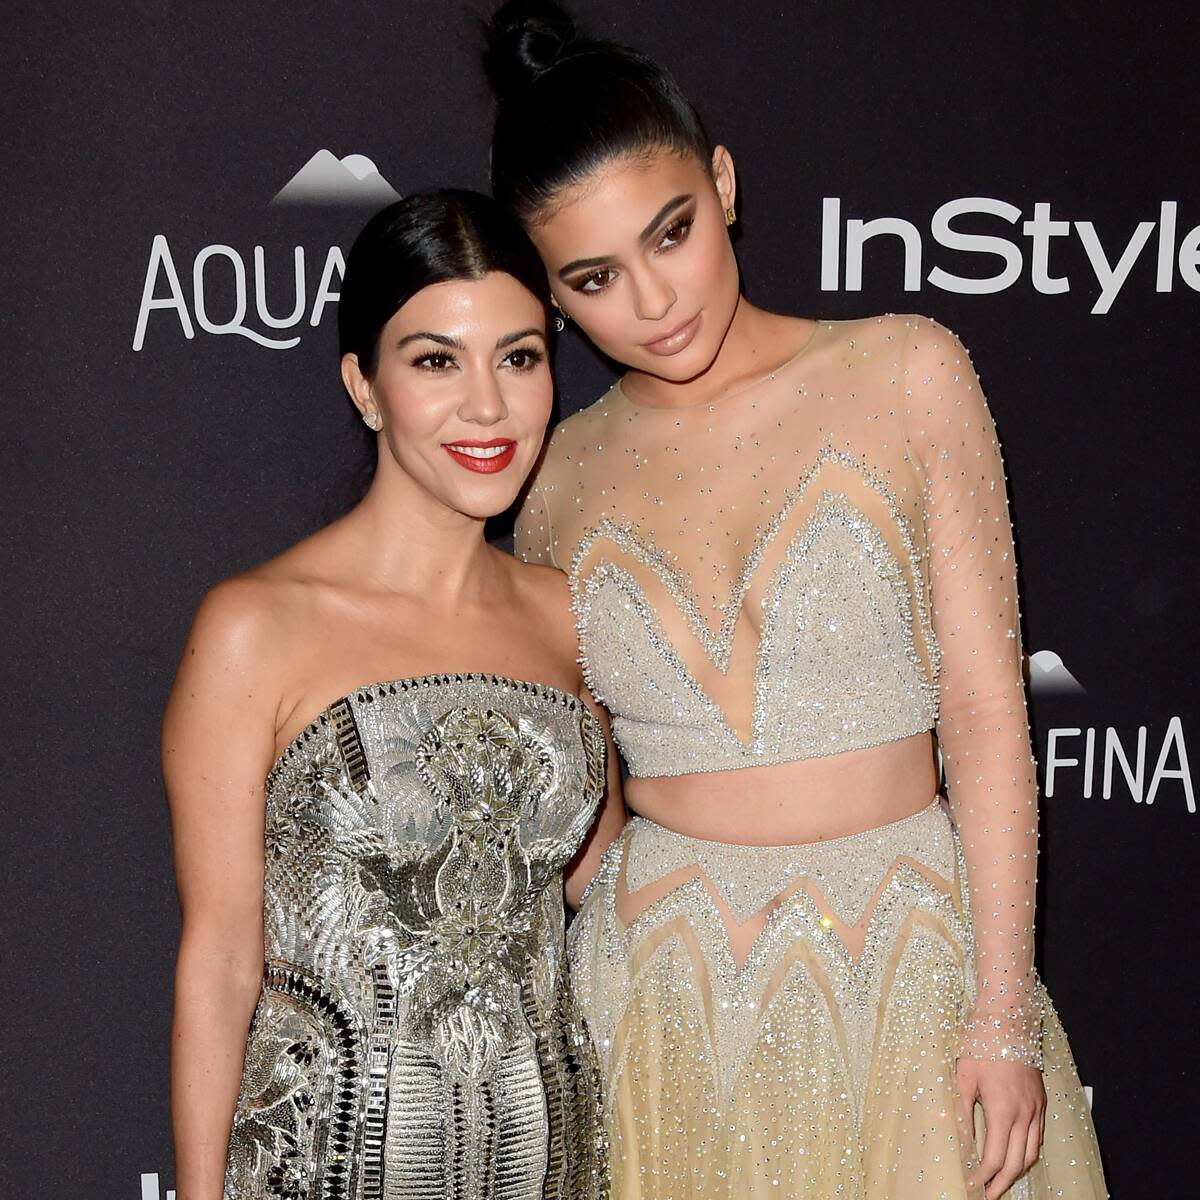 Kourtney Kardashian and Kylie Jenner relive the fallout from Kim’s “Least Interesting to Watch” shadow